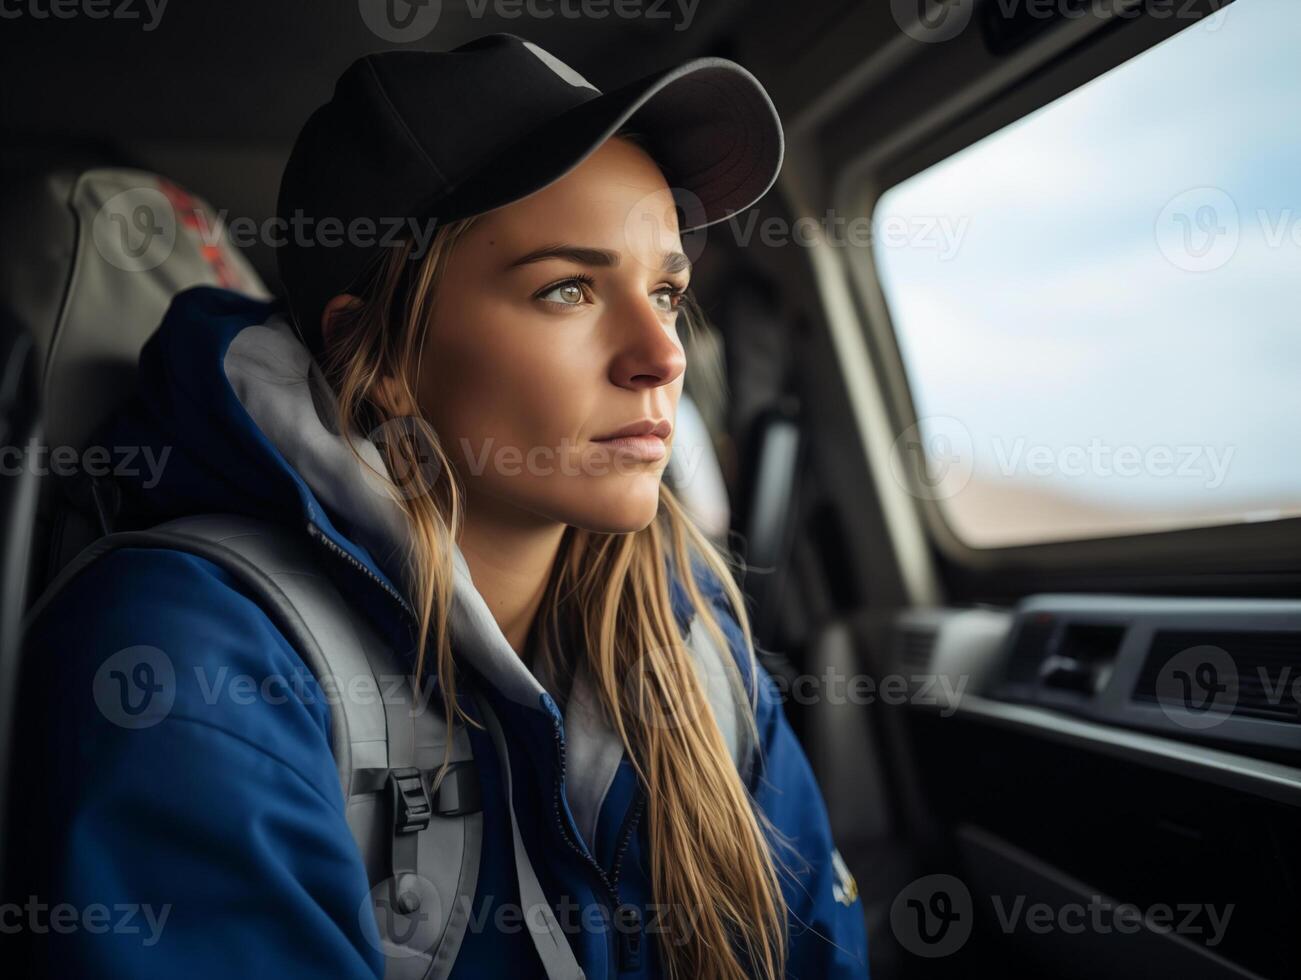 Female truck driver at work close-up. Woman career concept photo